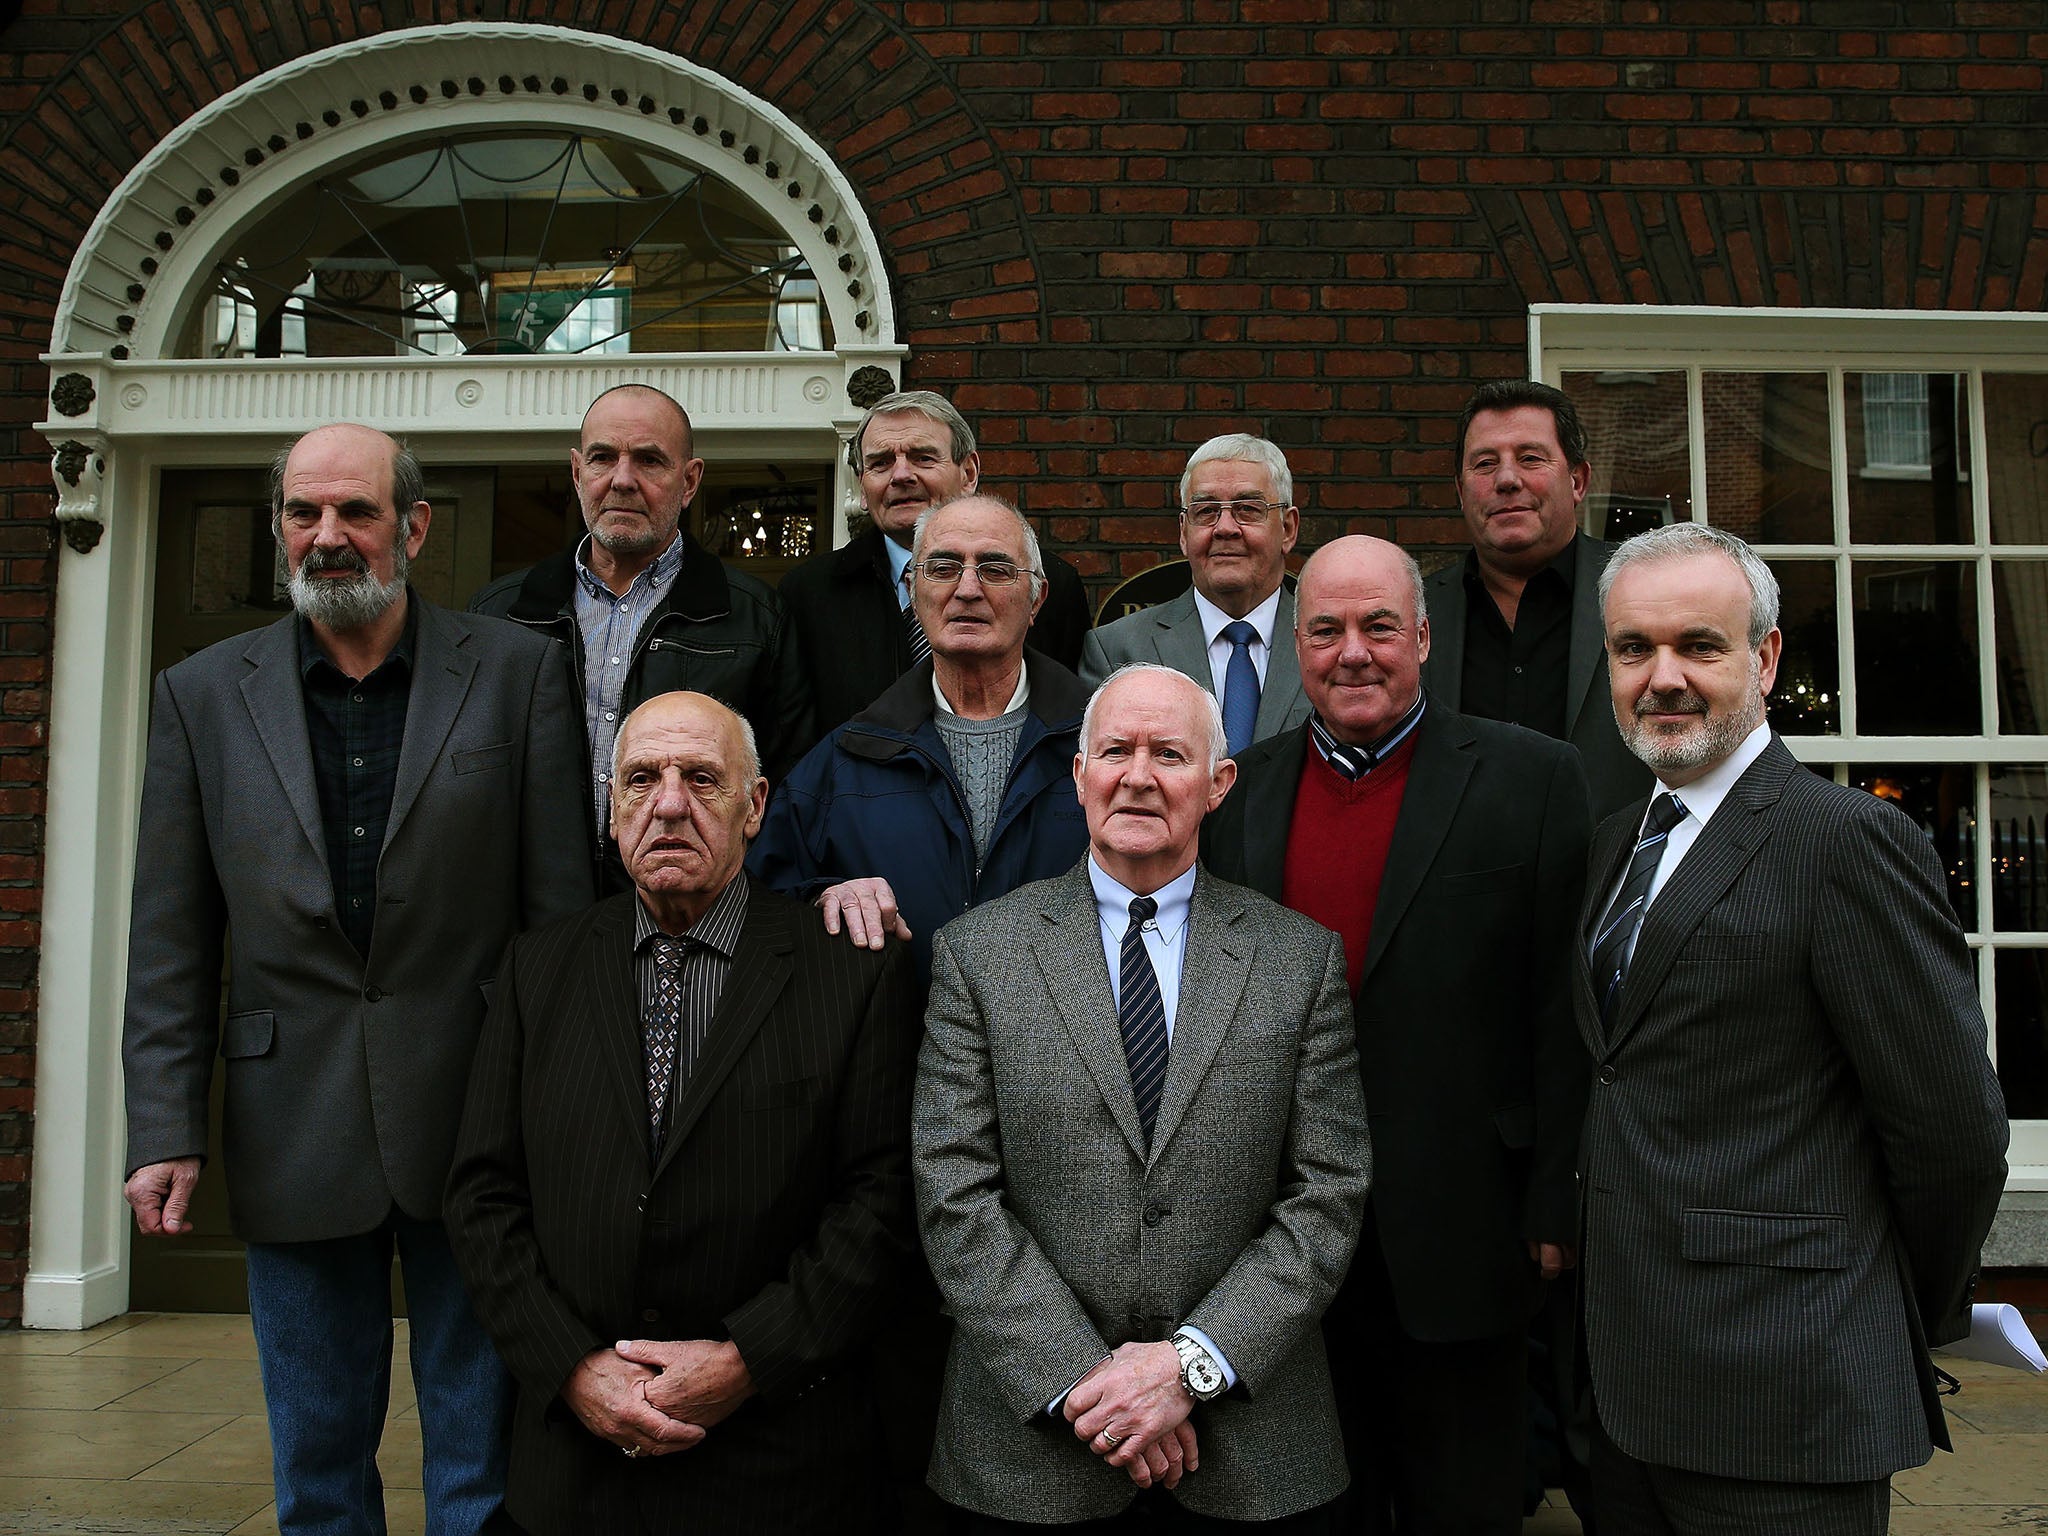 Colm O'Gorman, executive director of Amnesty International Ireland, (front right) with a number of the surviving 'Hooded Men' (front row from left) Michael Donnelly, and Liam Shannon, (middle row from left) Kevin Hannaway, Gerry McKerr, and Jim Auld, (bac